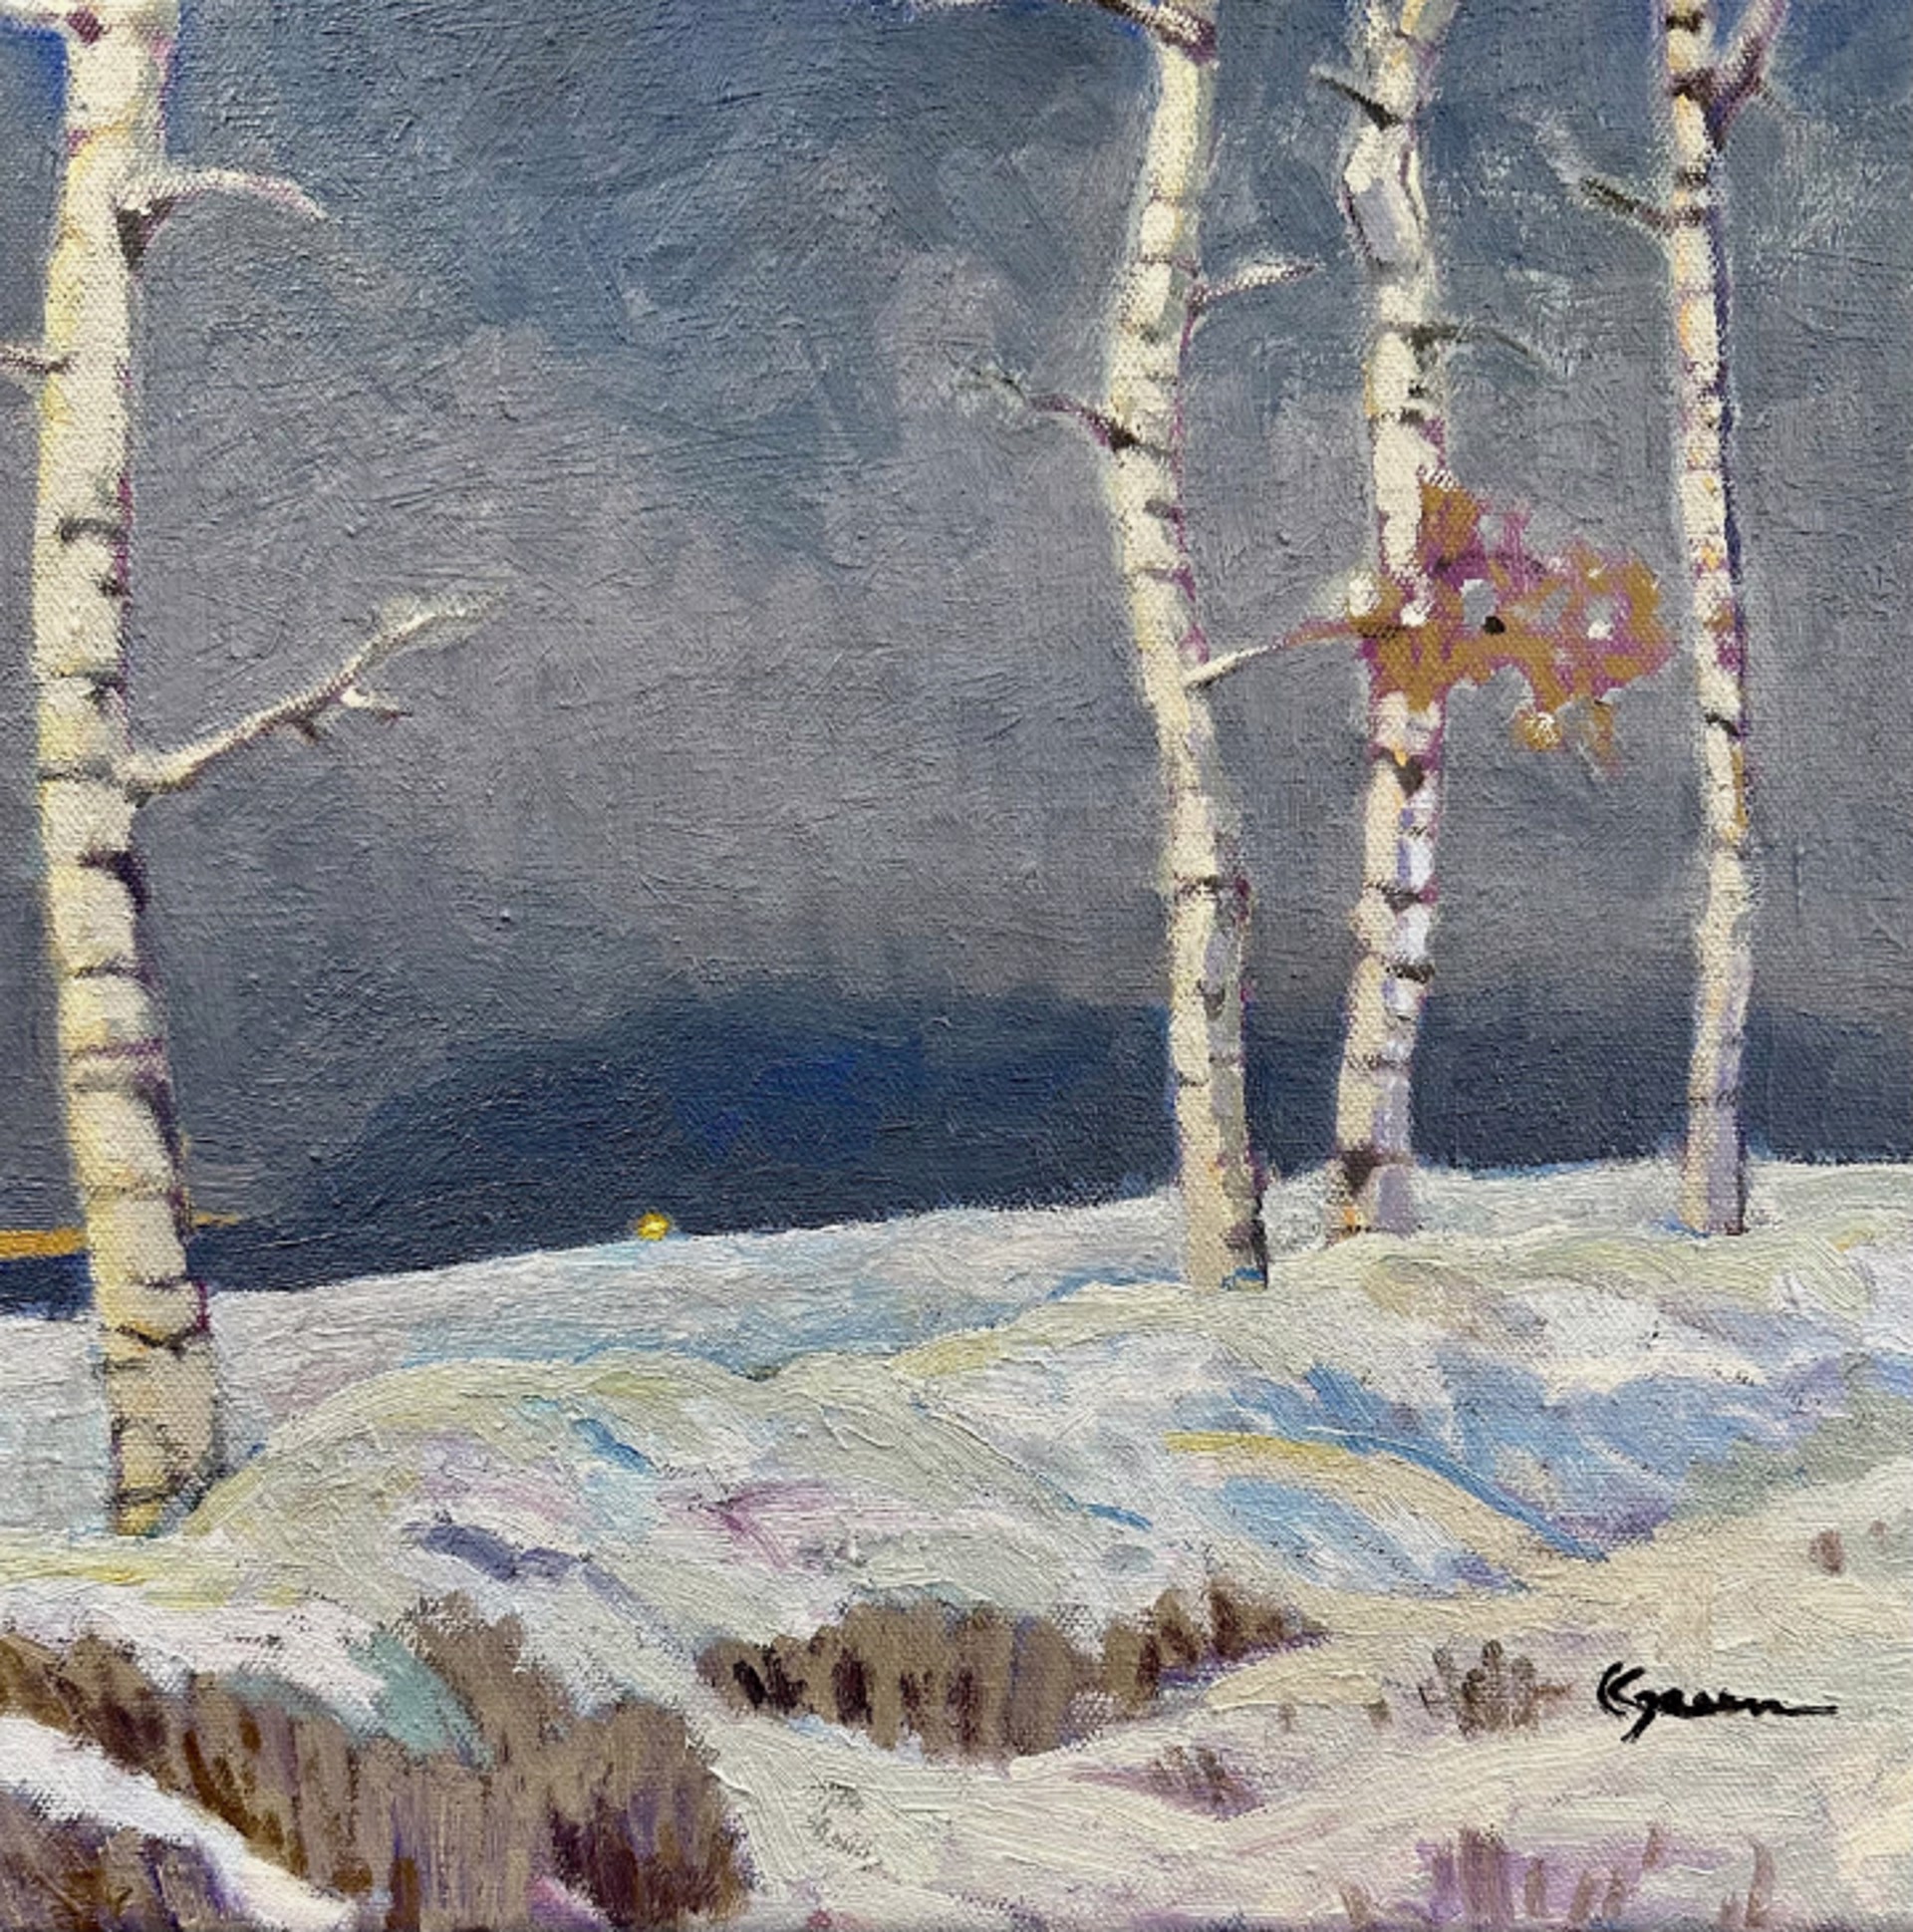 Edge of the Meadow, First Snow by Kenneth Green